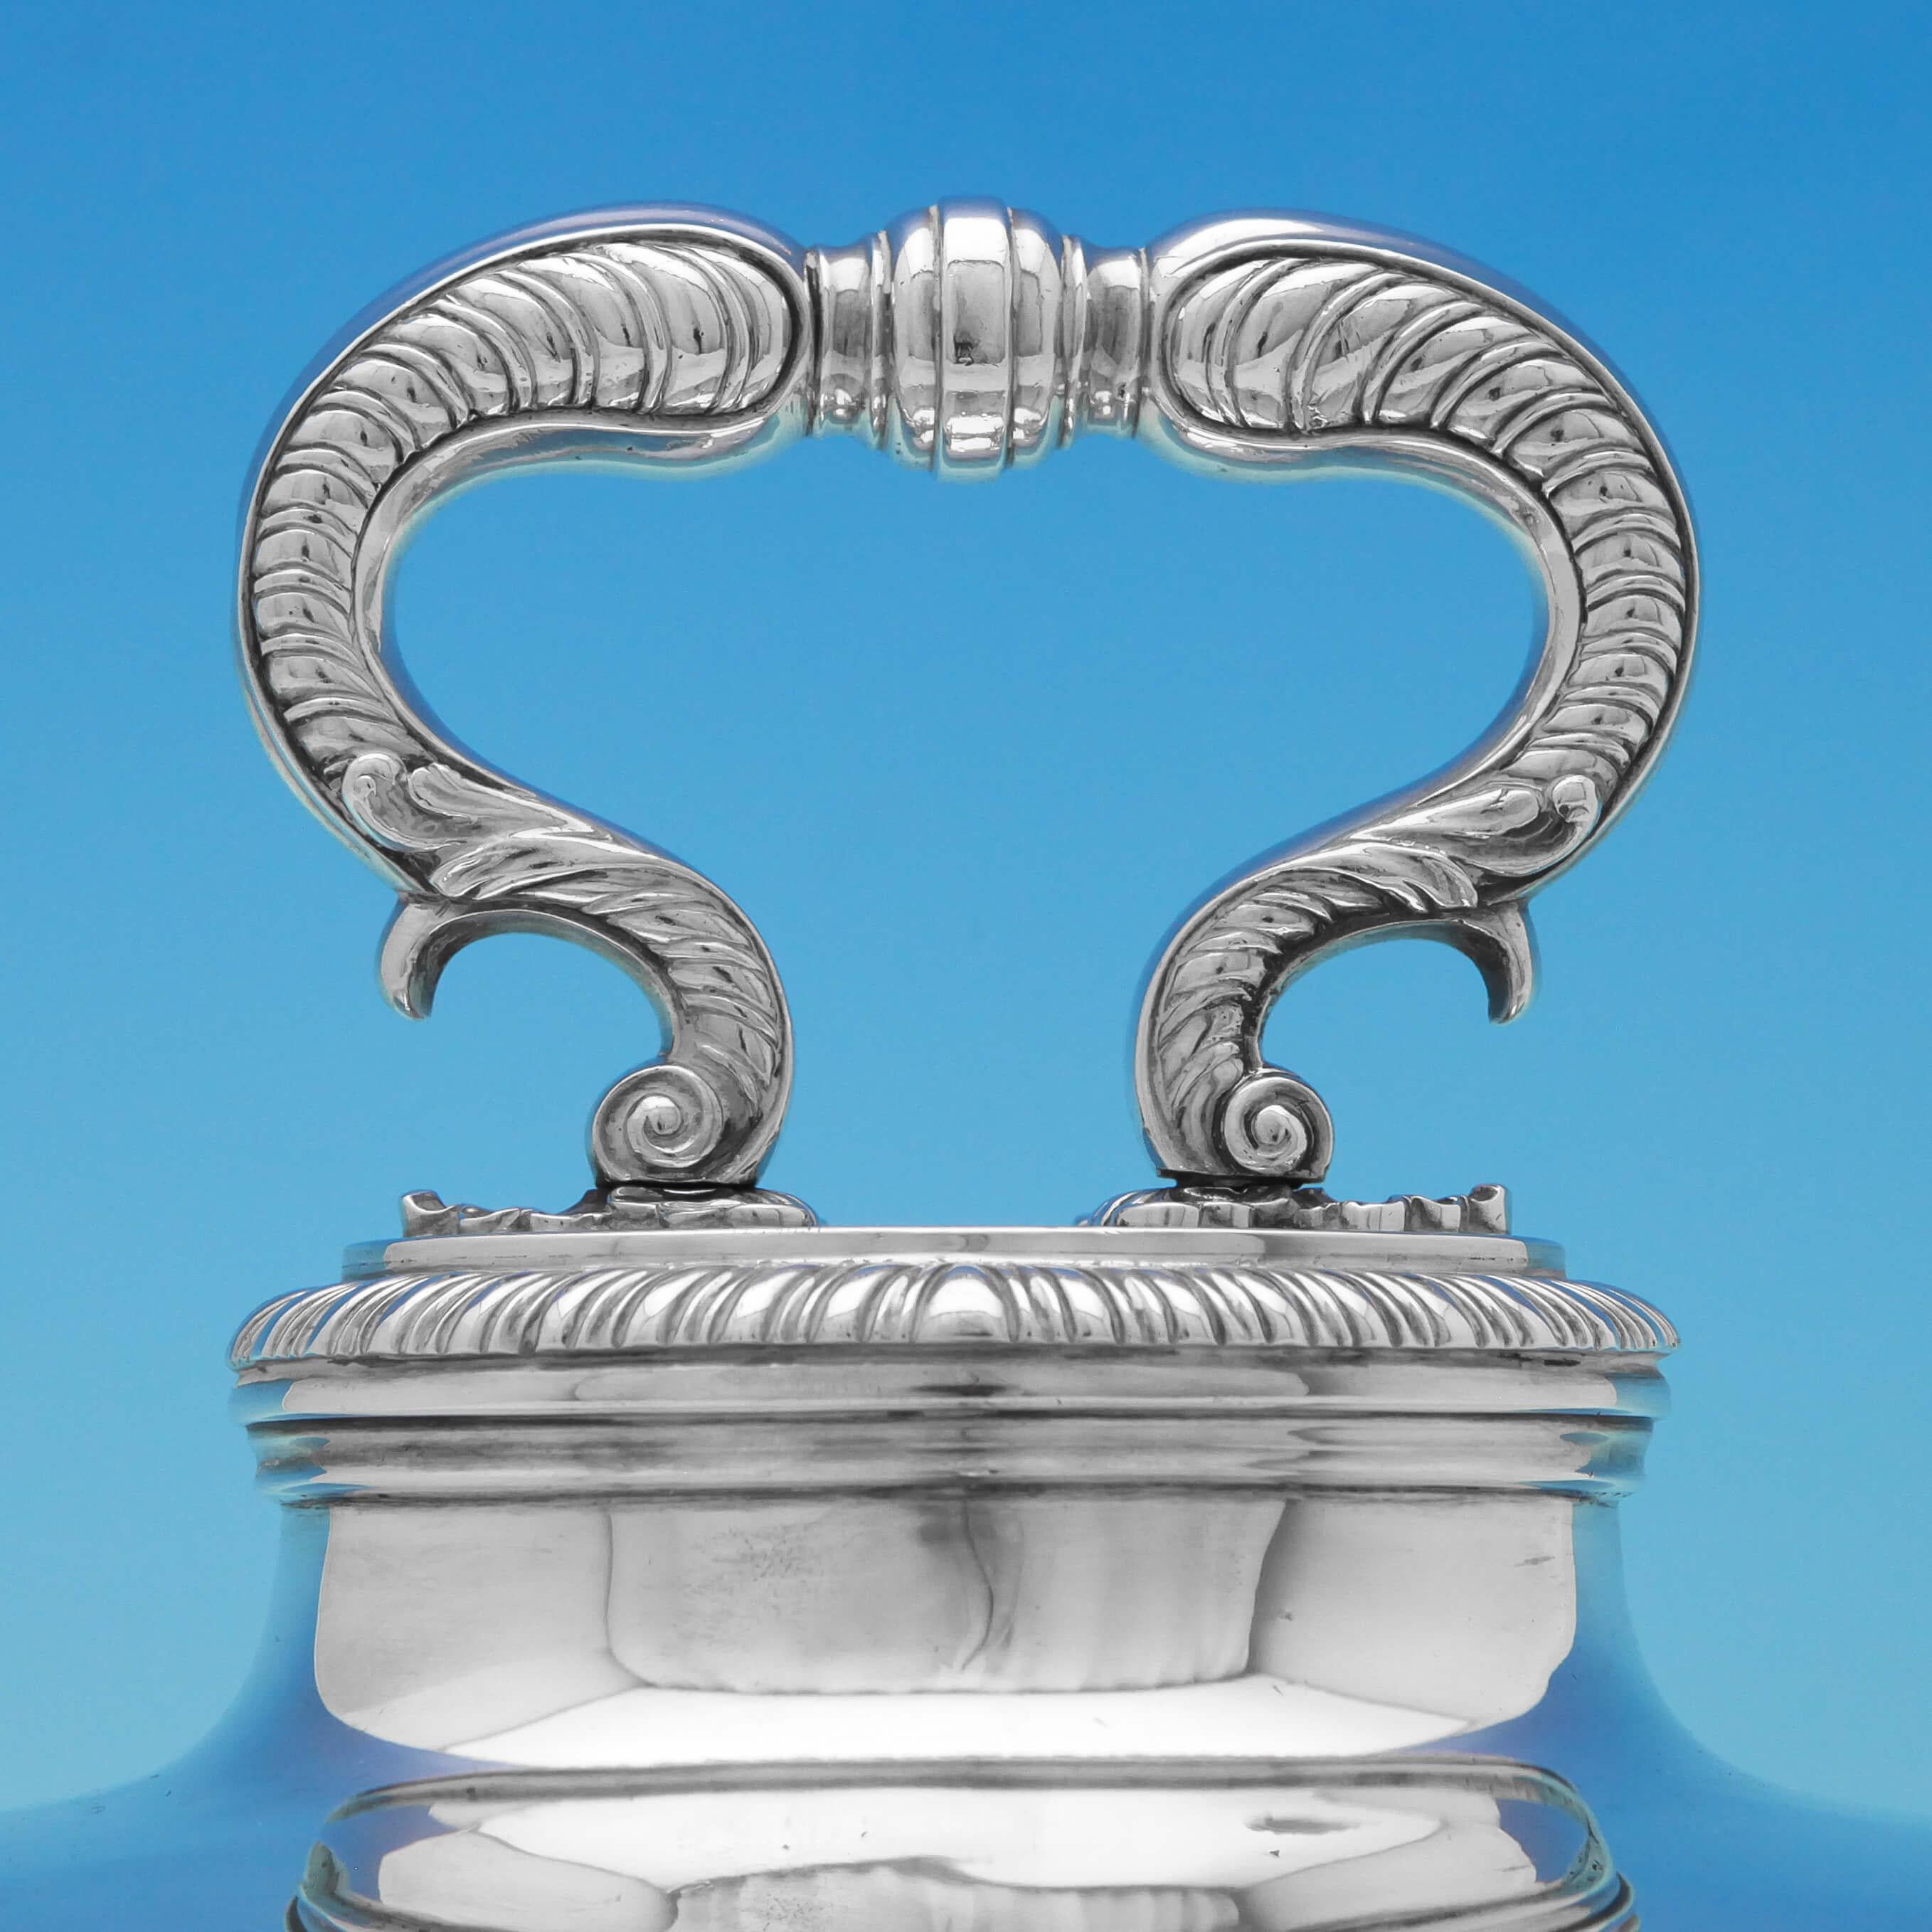 Hallmarked in London in 1807 by Paul Storr, this handsome, George III, Antique Sterling Silver Meat dish cover, features a shaped gadroon border and removable gadroon detailed handle and is engraved with the coat of arms of Weetman Dickinson